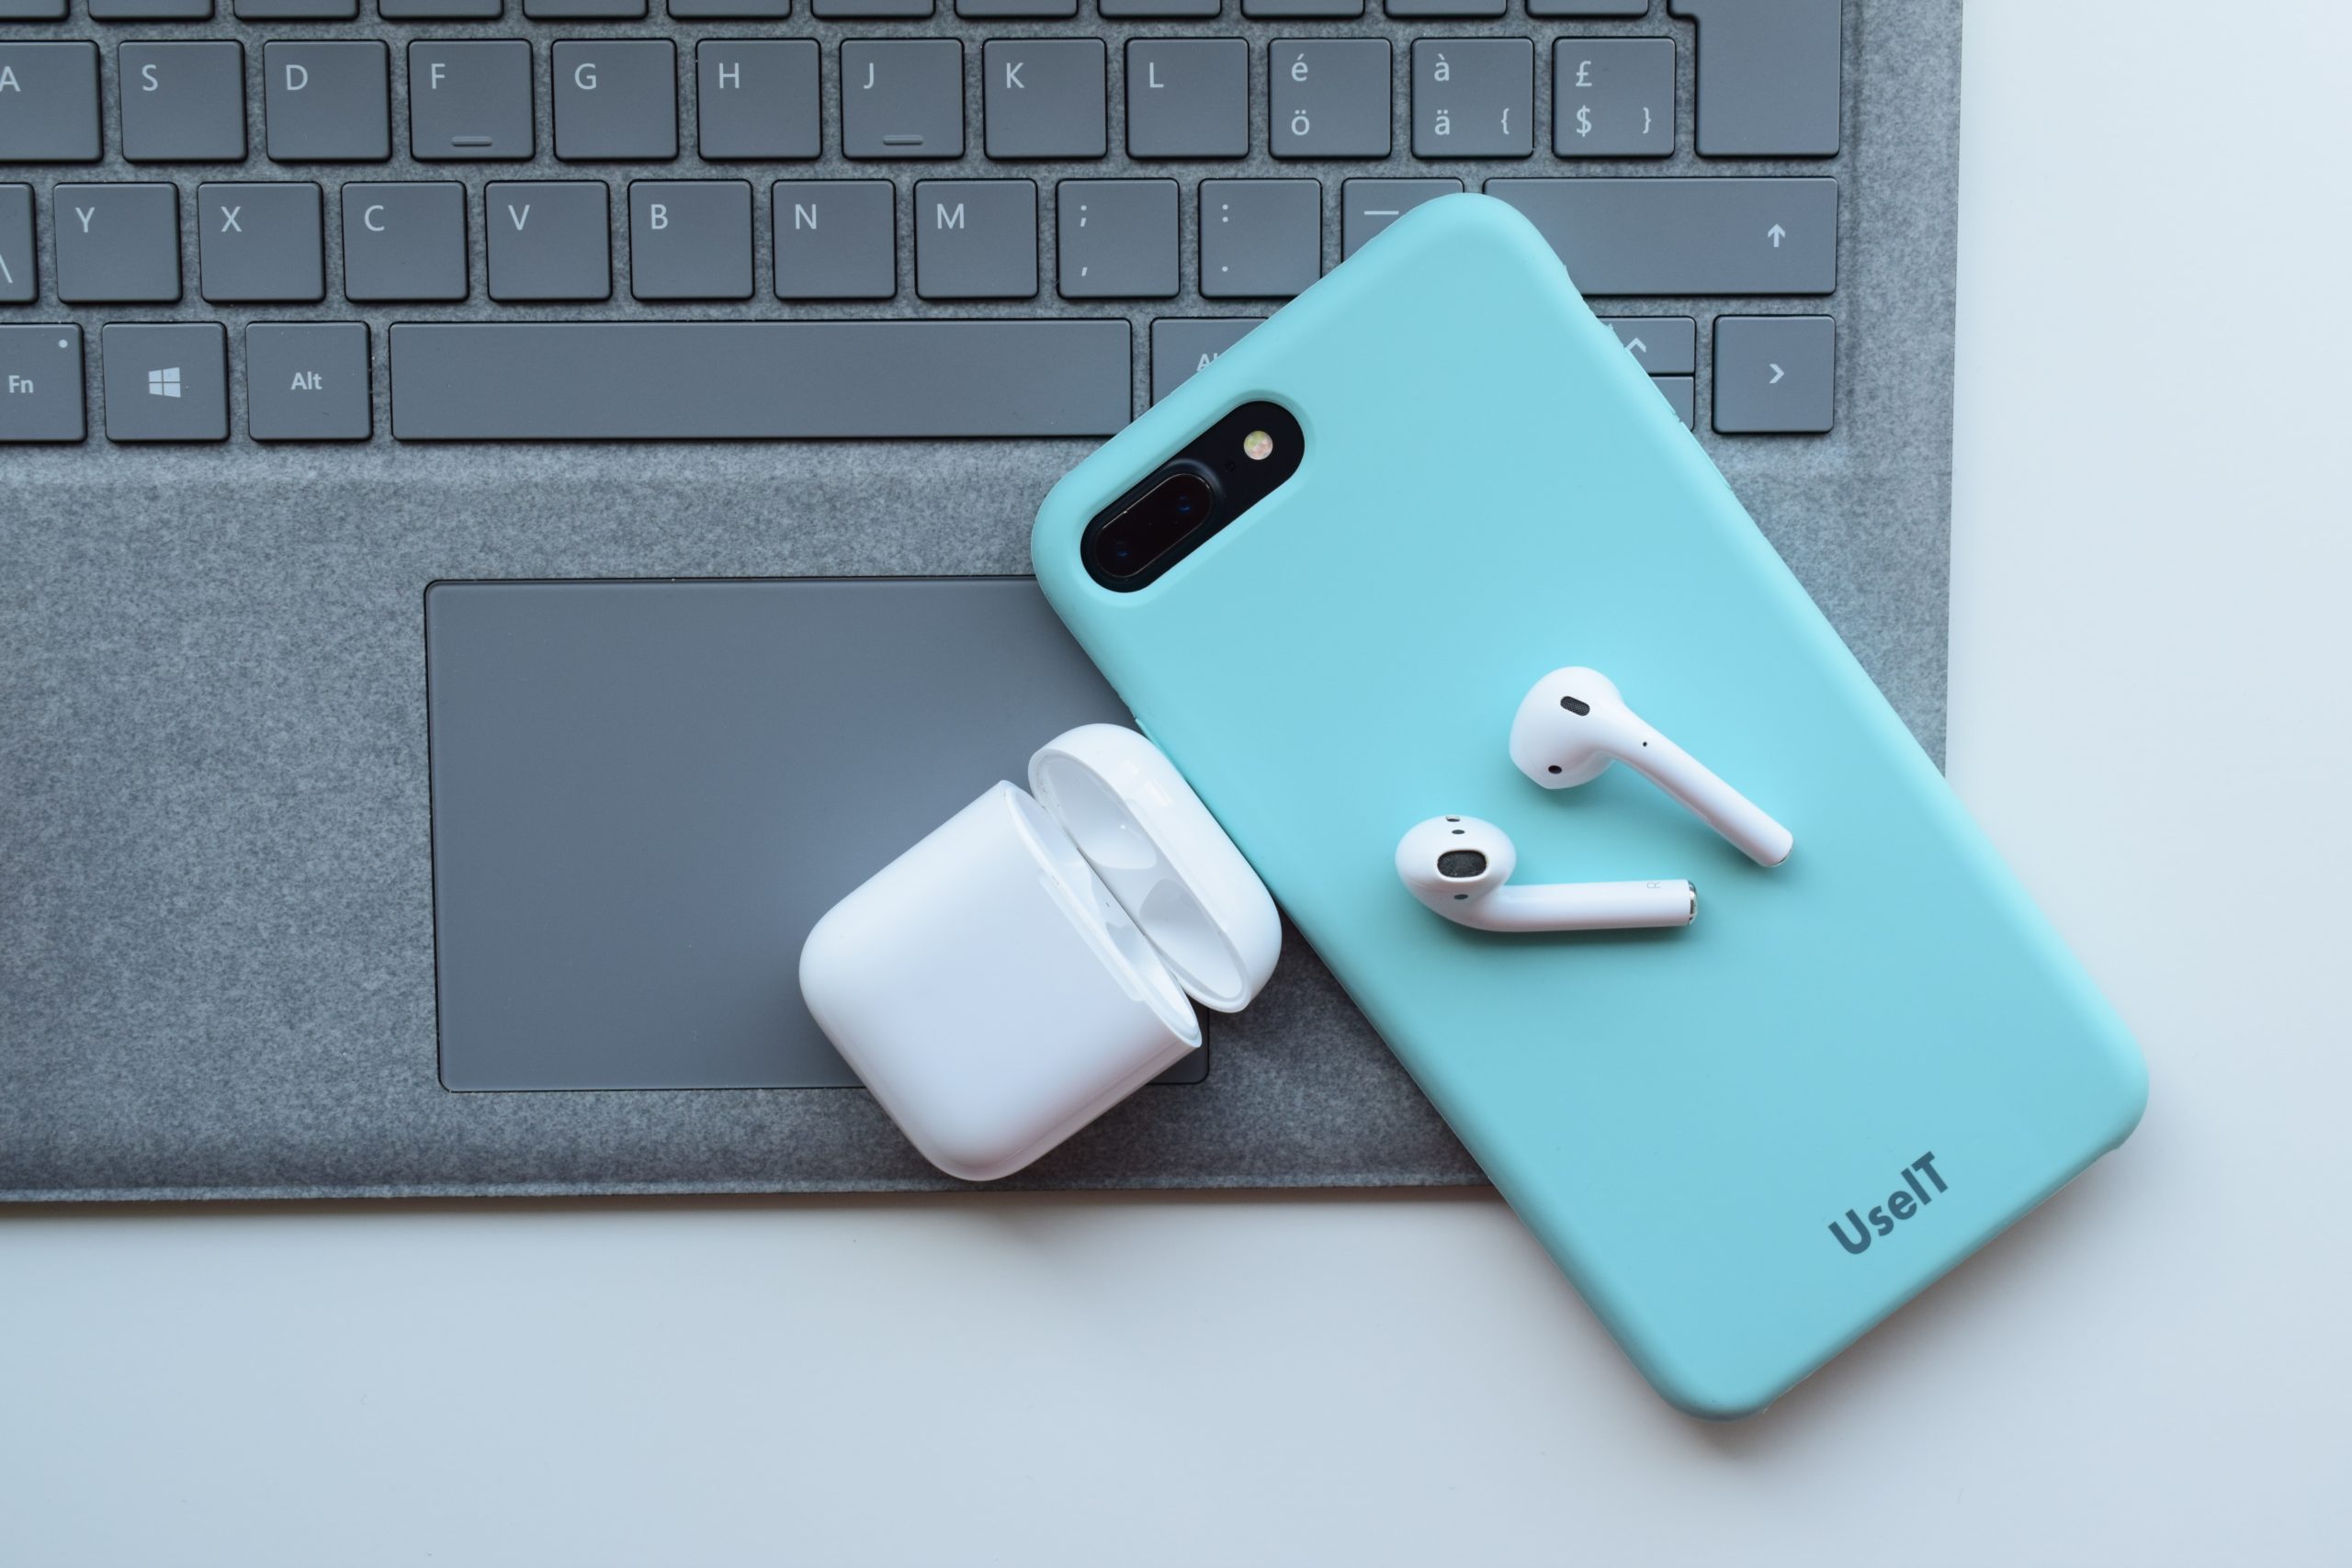 øge hylde karakter How to Connect AirPods to Windows PC | OSXDaily